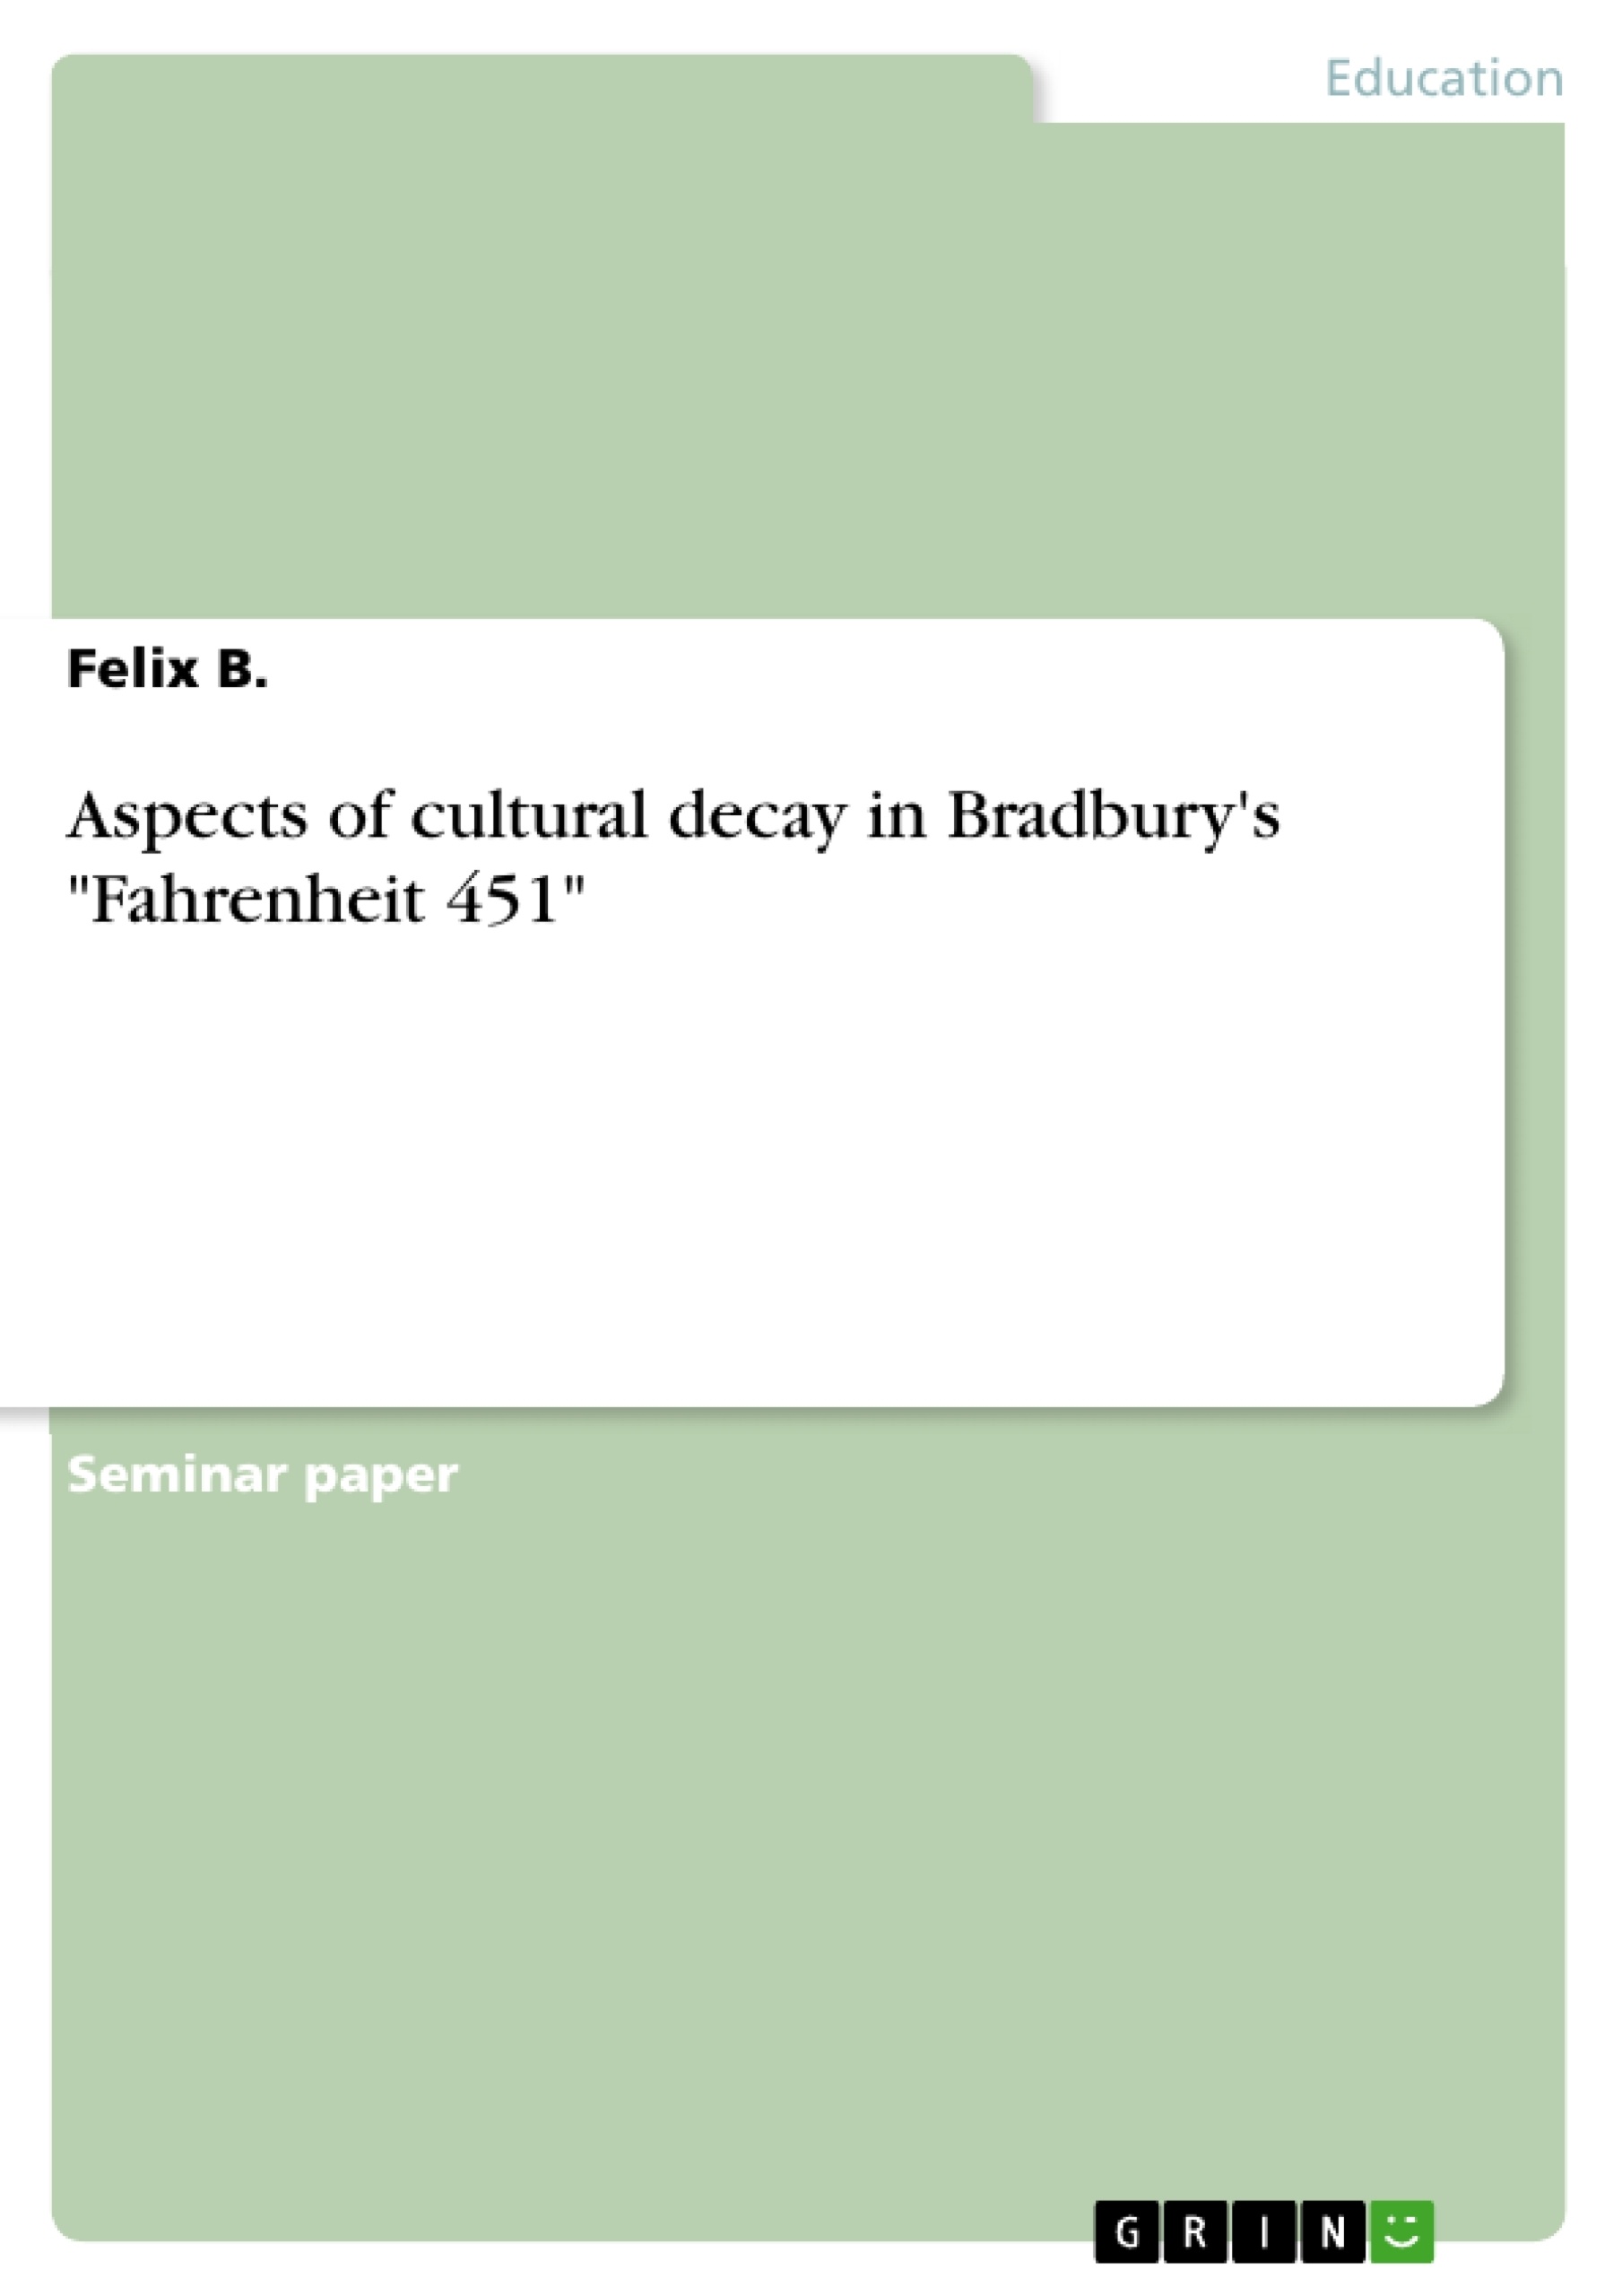 Title: Aspects of cultural decay in Bradbury's "Fahrenheit 451"